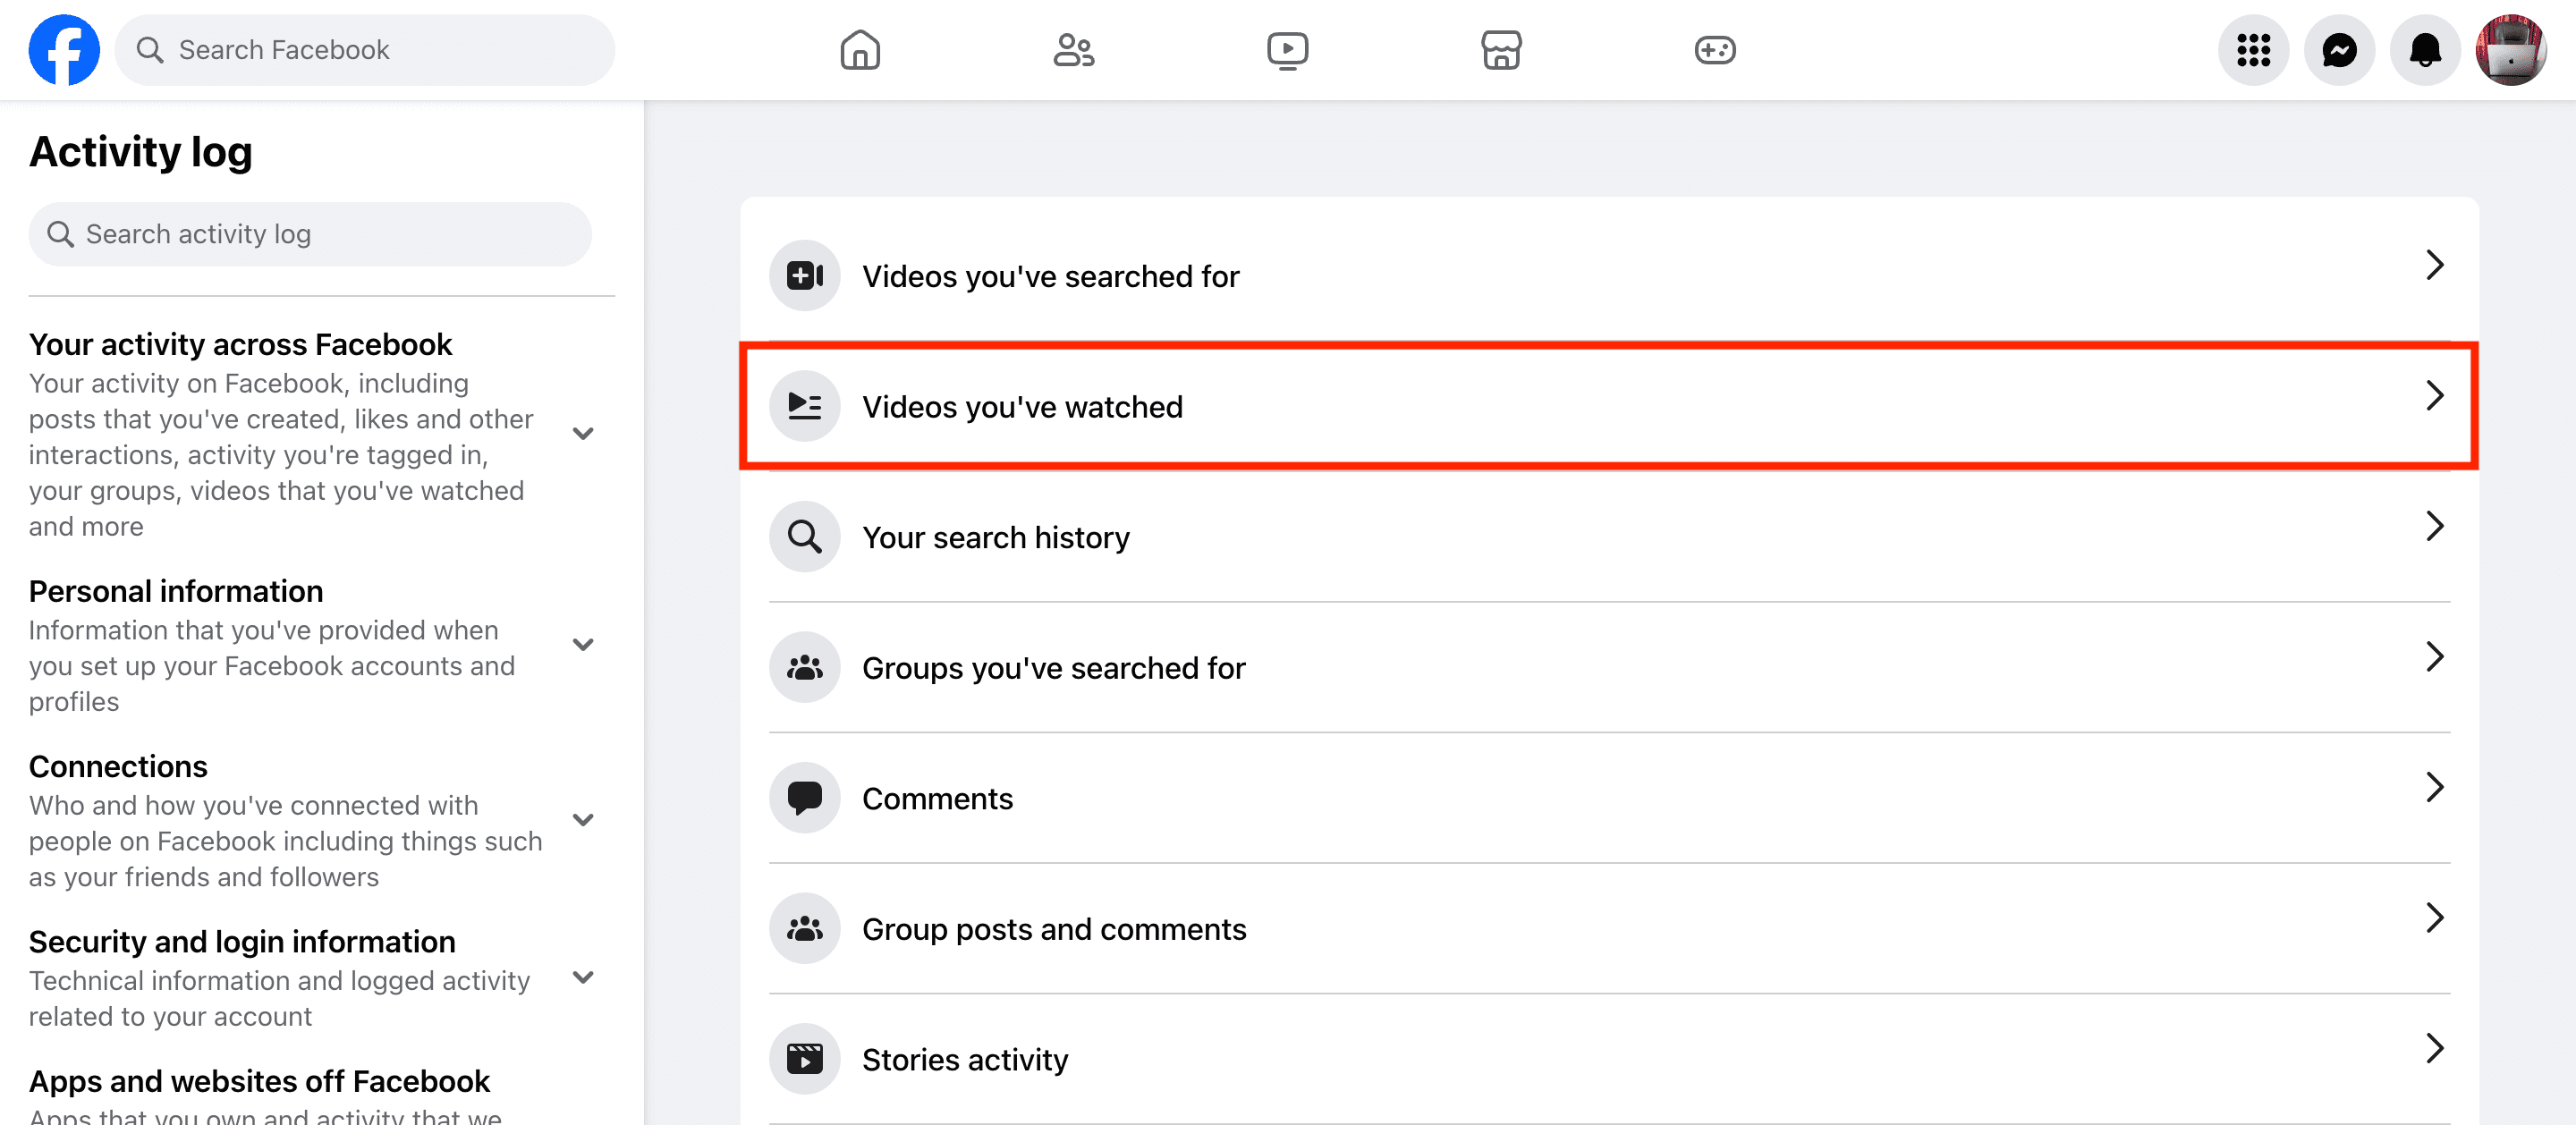 Videos you've watched in Facebook settings on computer